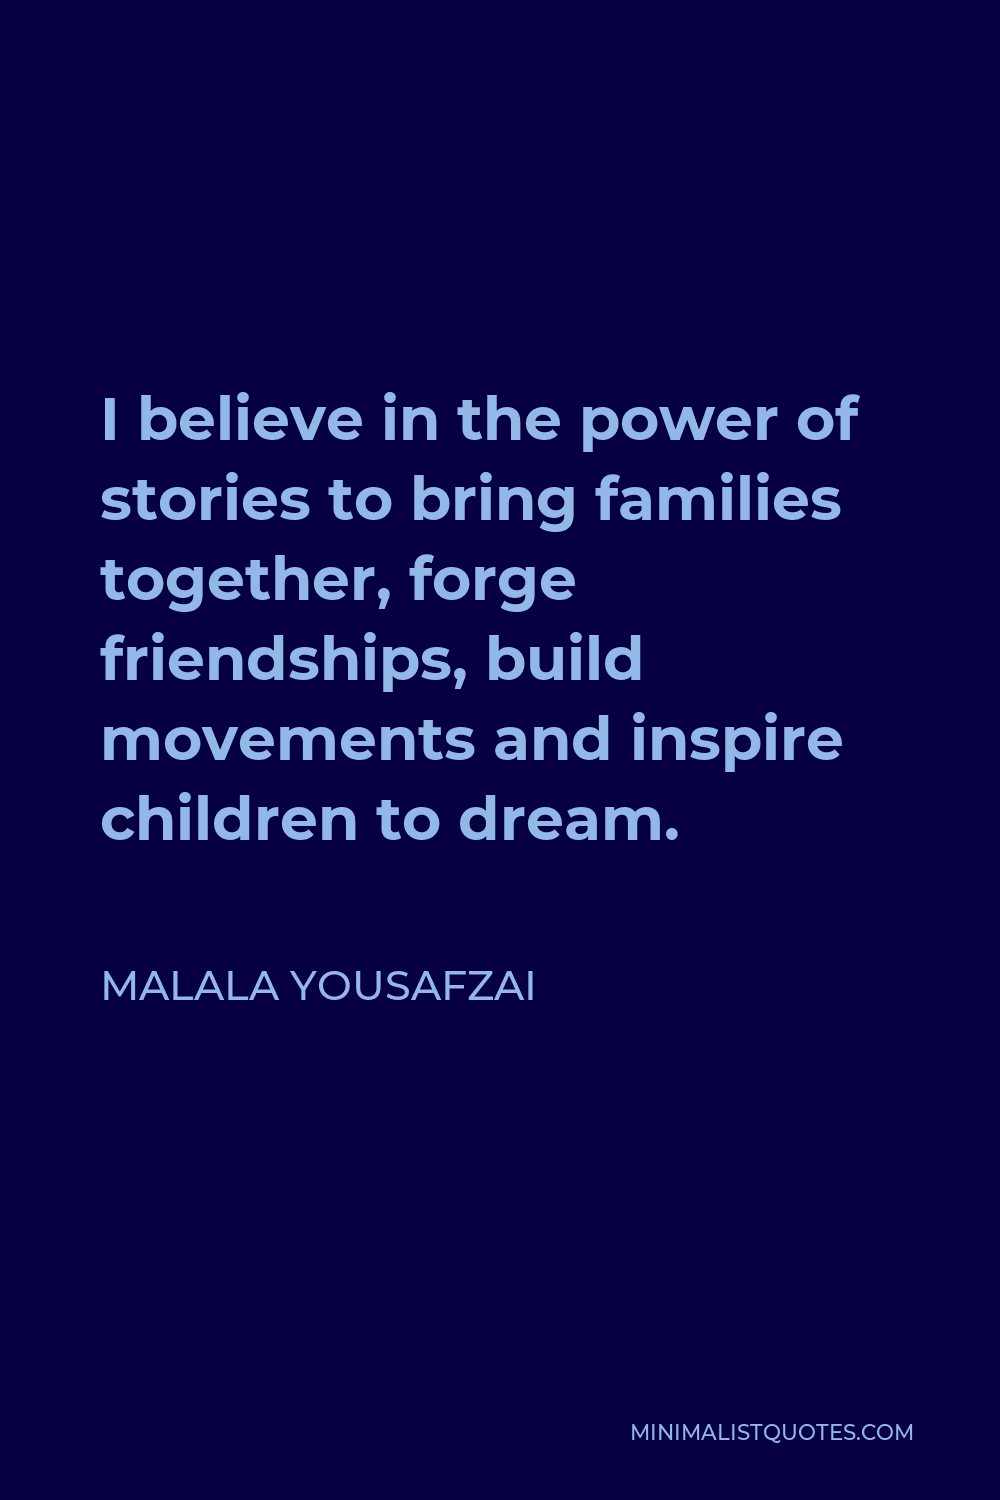 Malala Yousafzai Quote - I believe in the power of stories to bring families together, forge friendships, build movements and inspire children to dream.